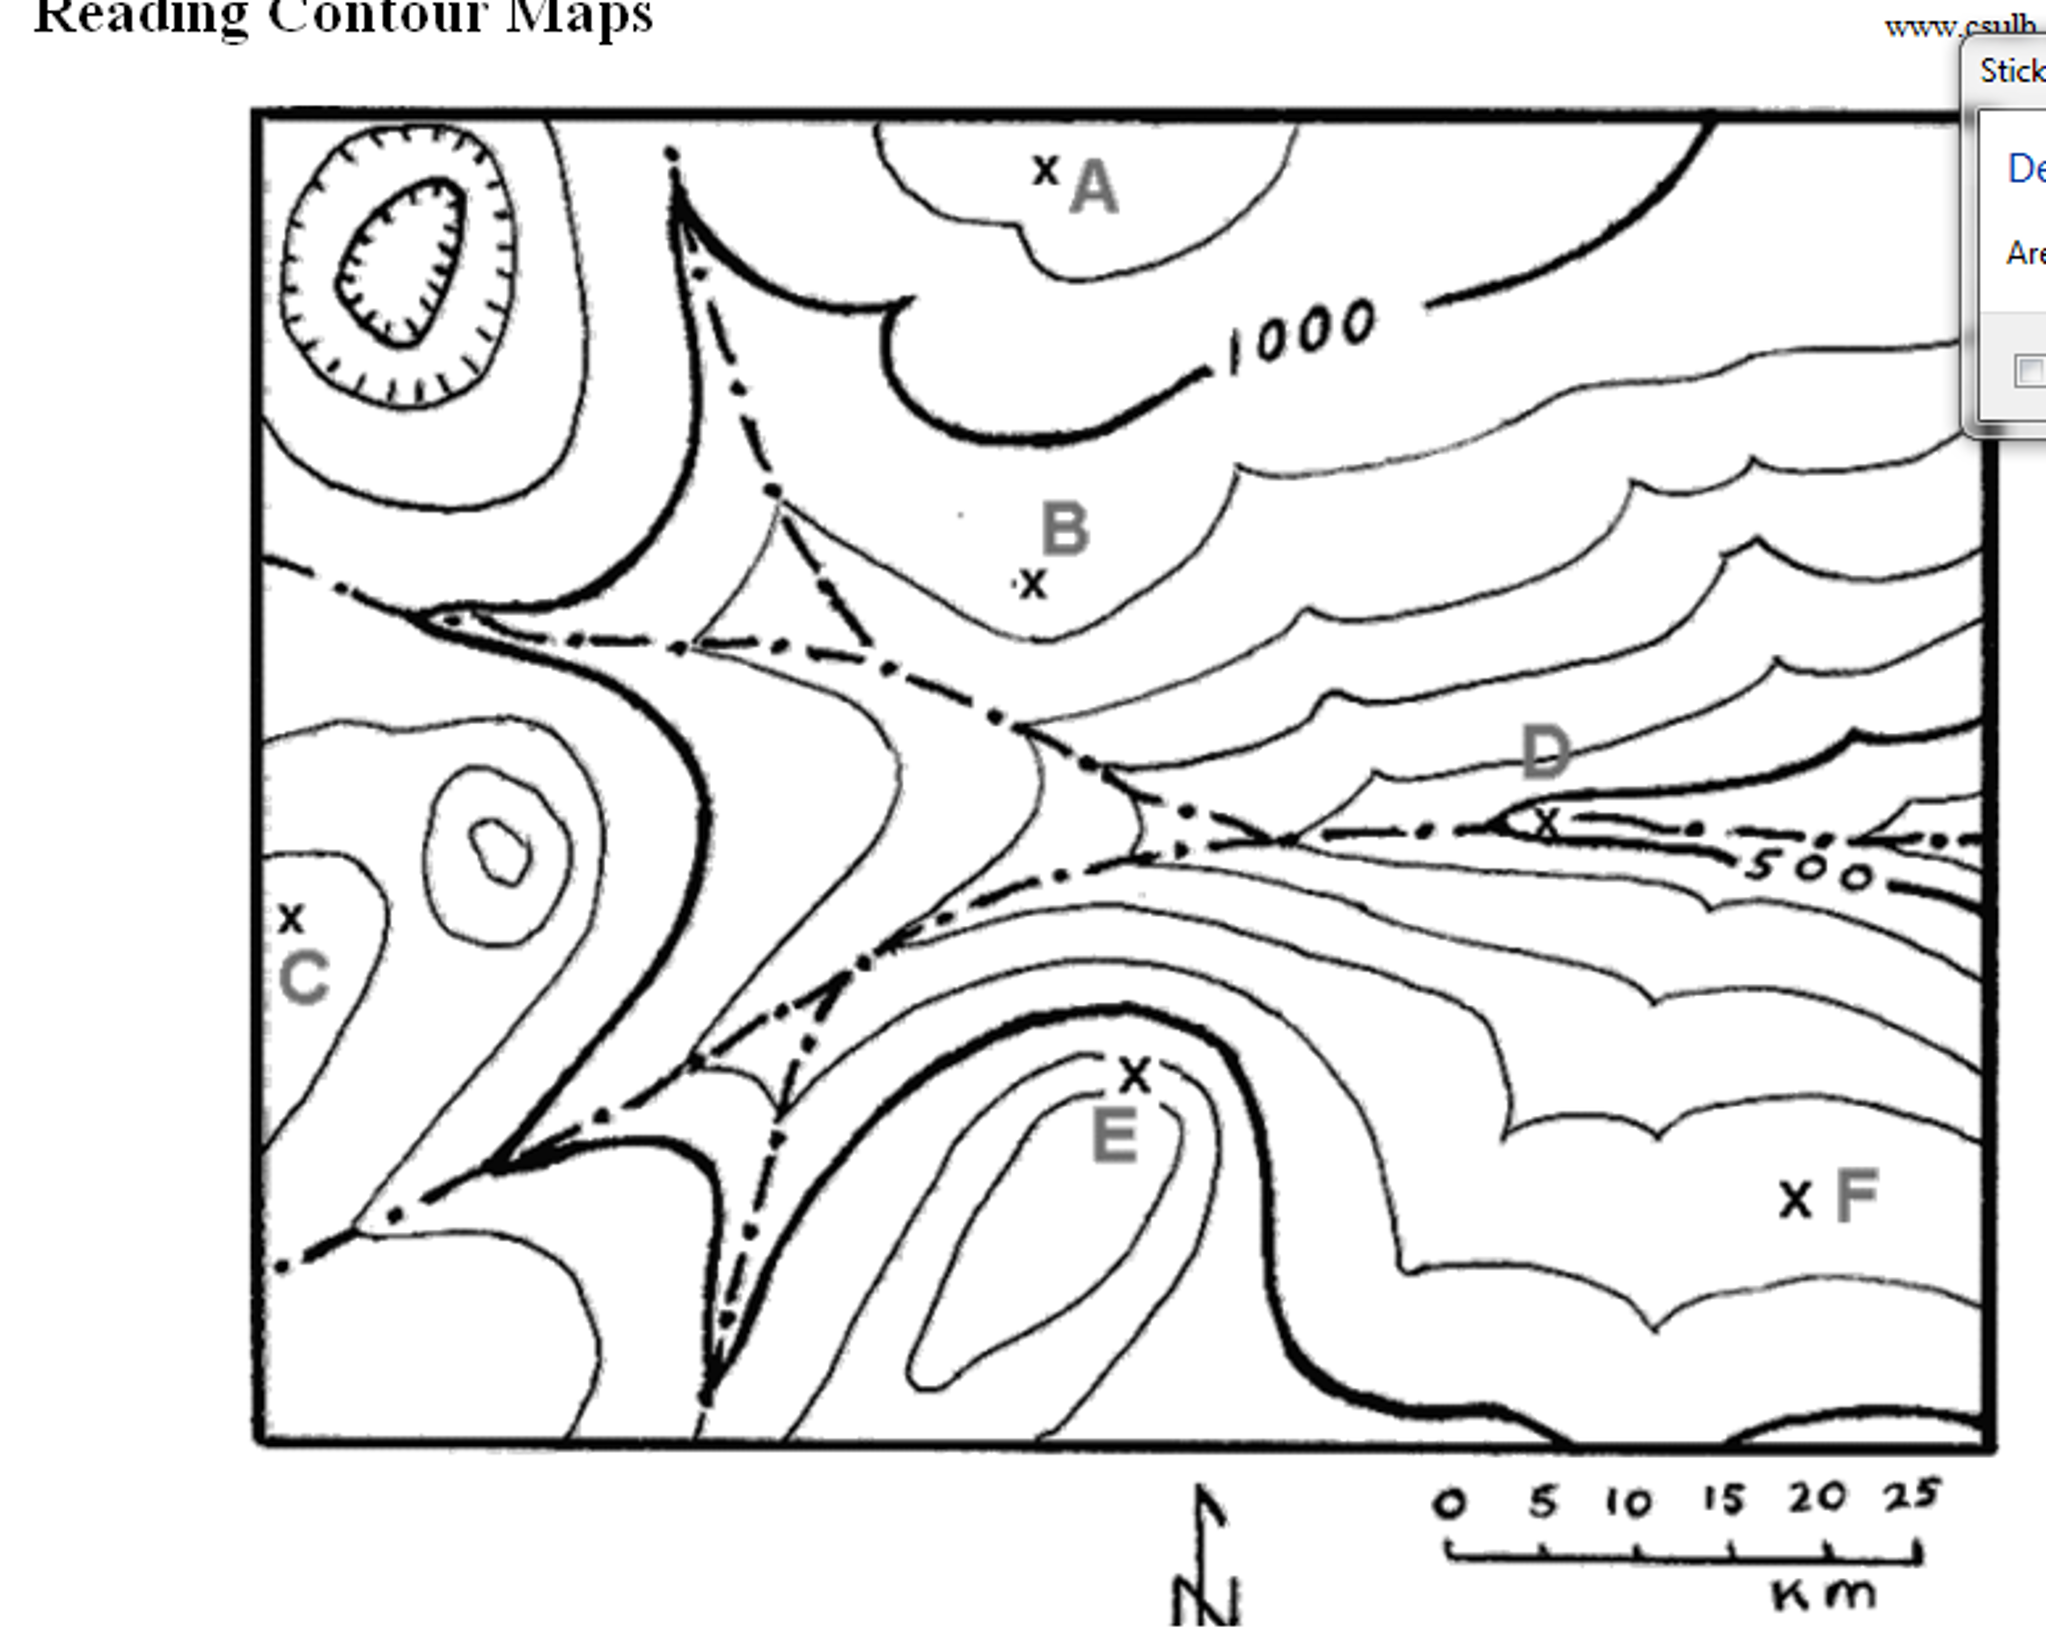 Reading Contour Maps  What is the contour interval